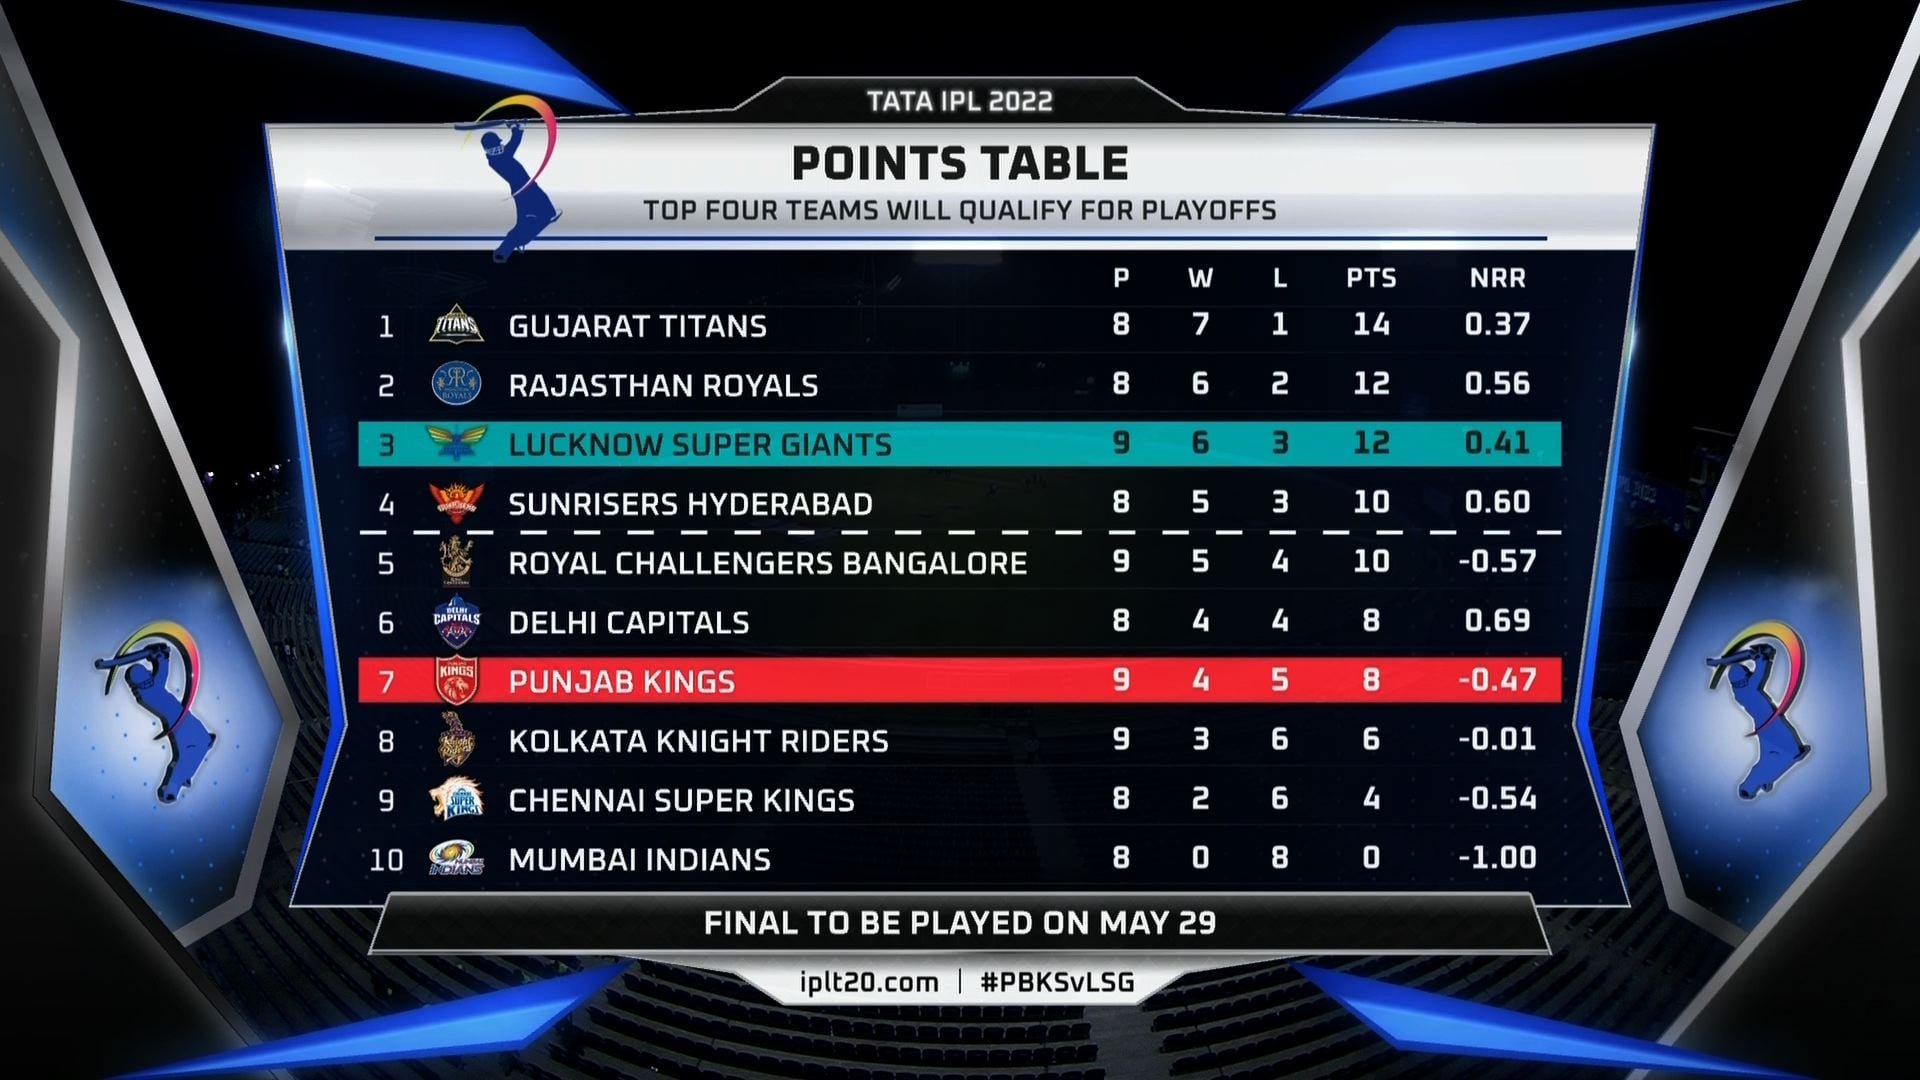 IPL 2022 POINT TABLE UPDATED